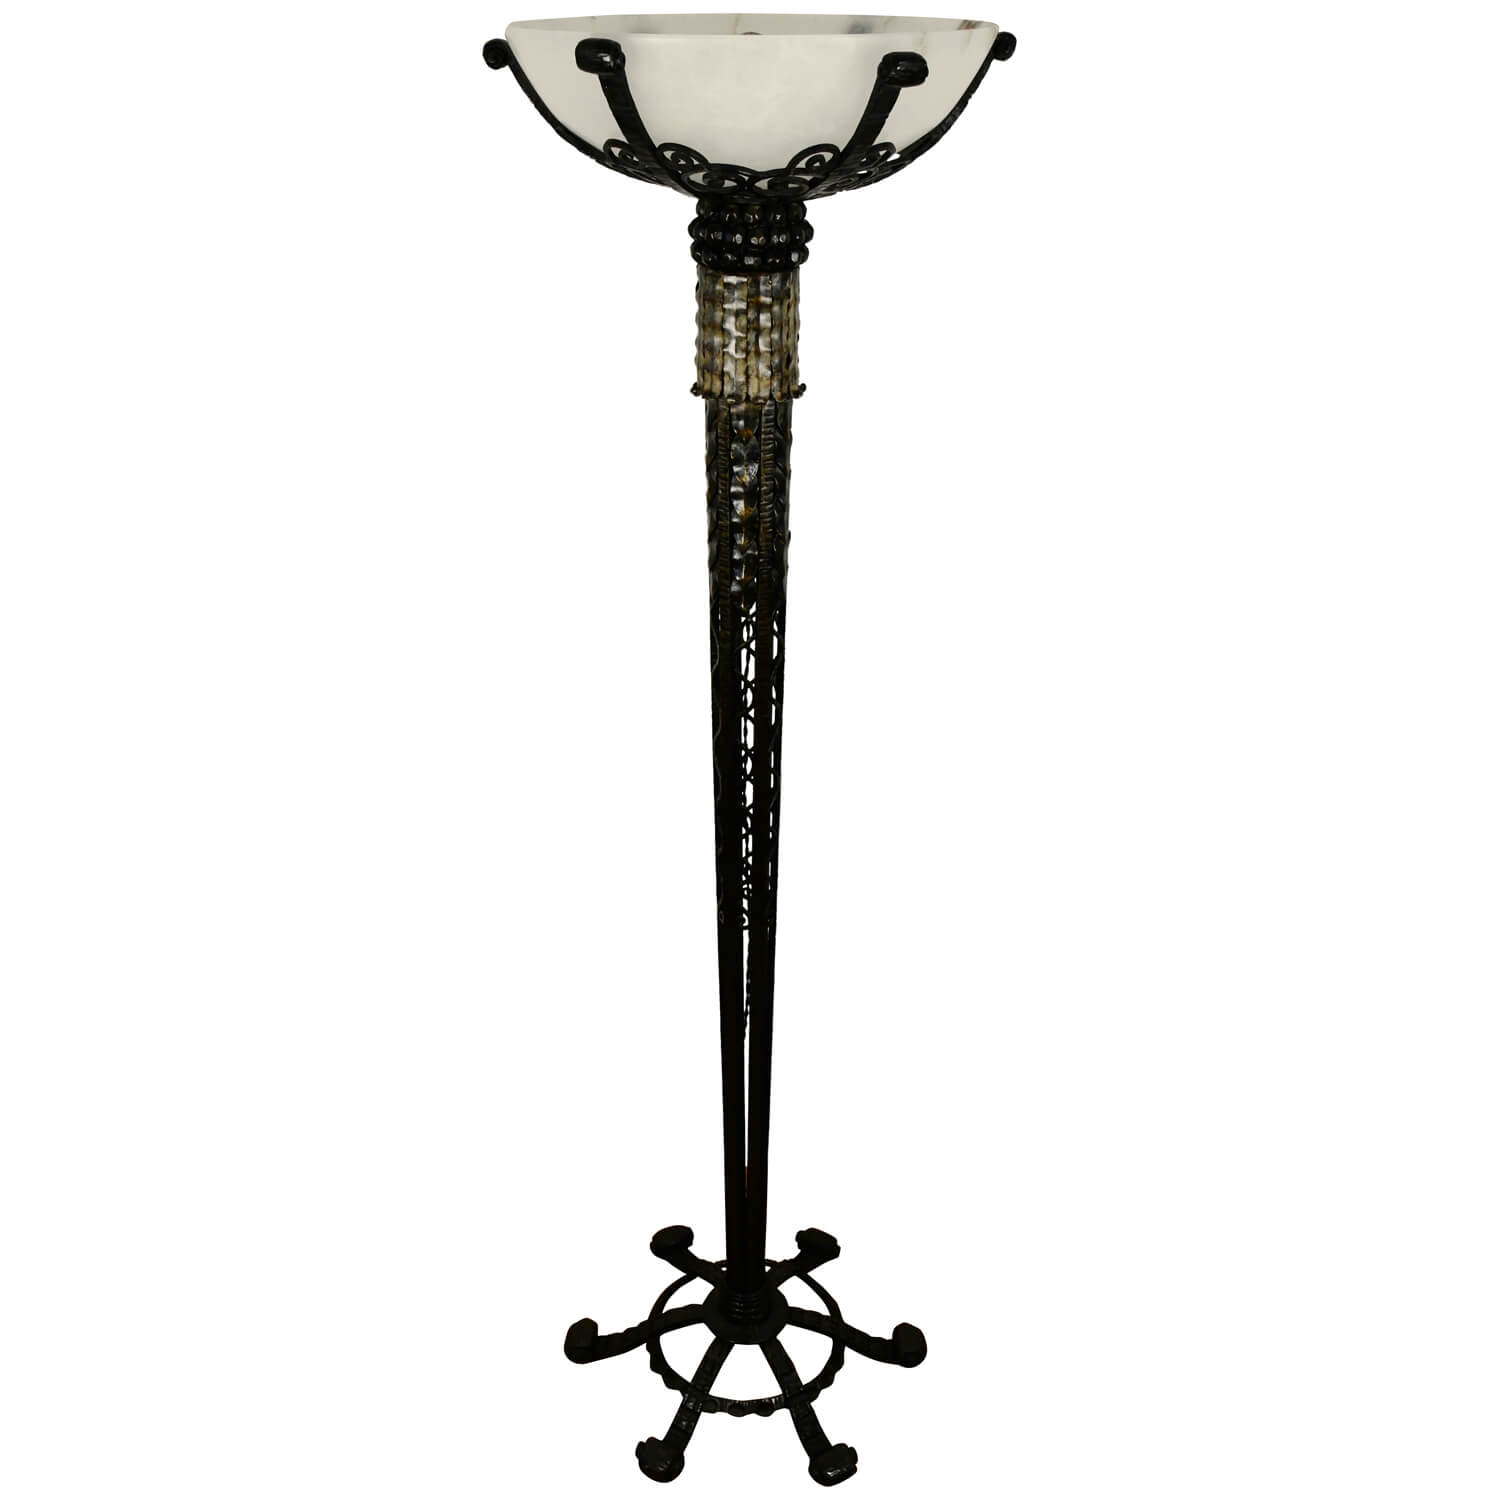 French Art Deco wrought iron and alabaster floorlamp.